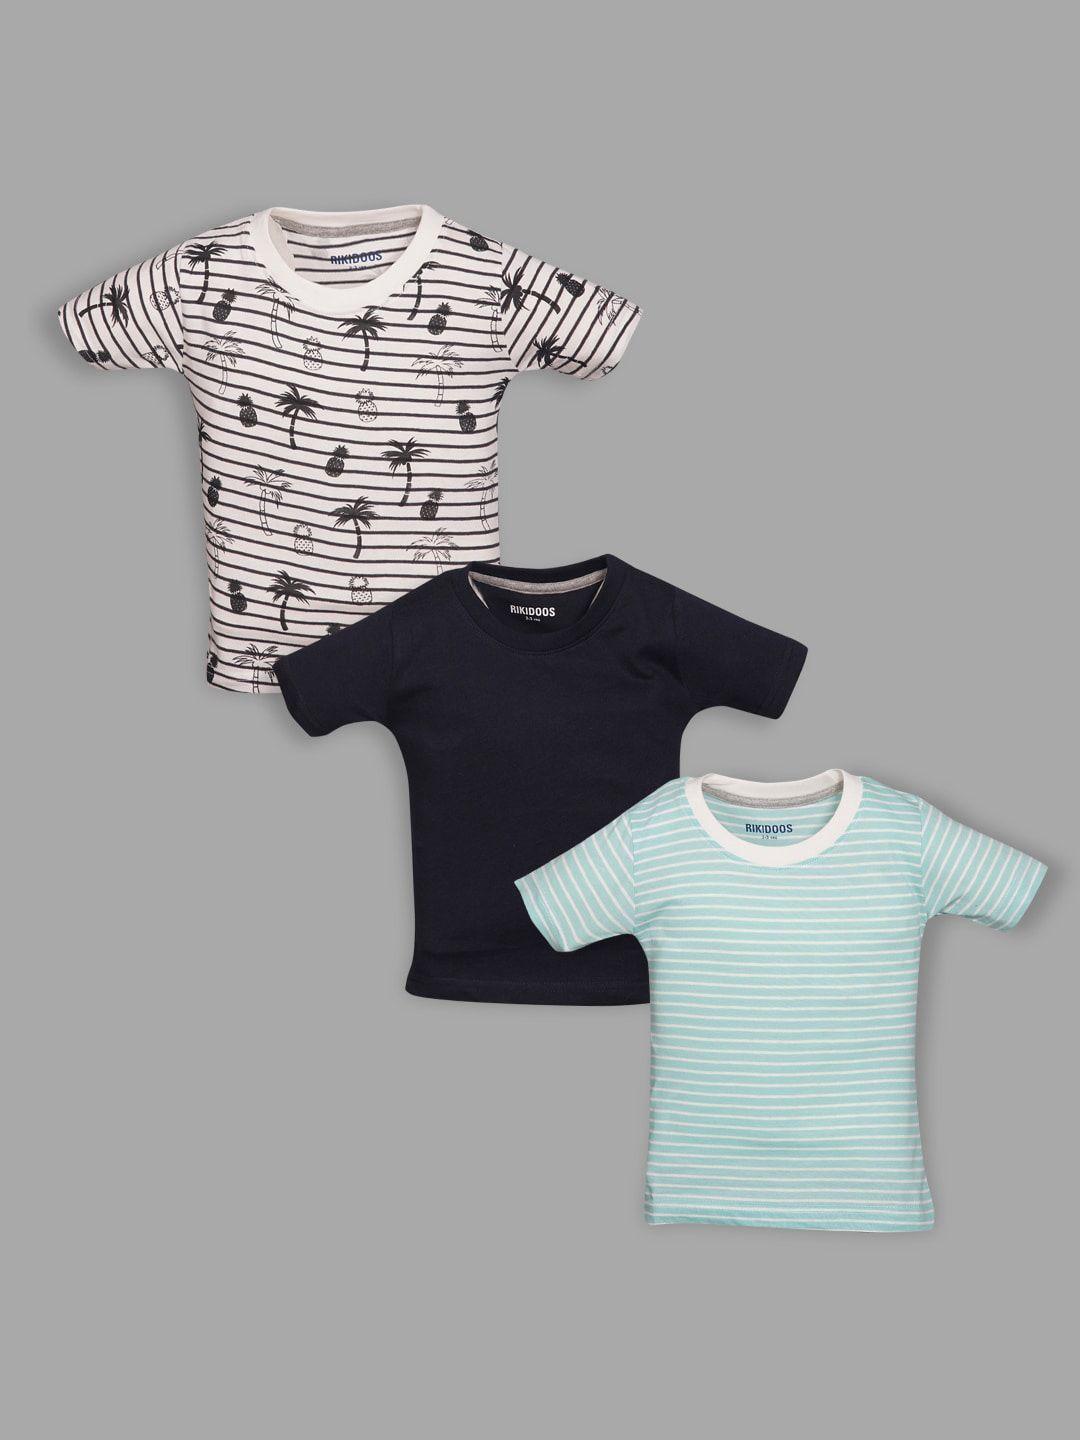 rikidoos boys pack of 3 striped cotton t-shirt